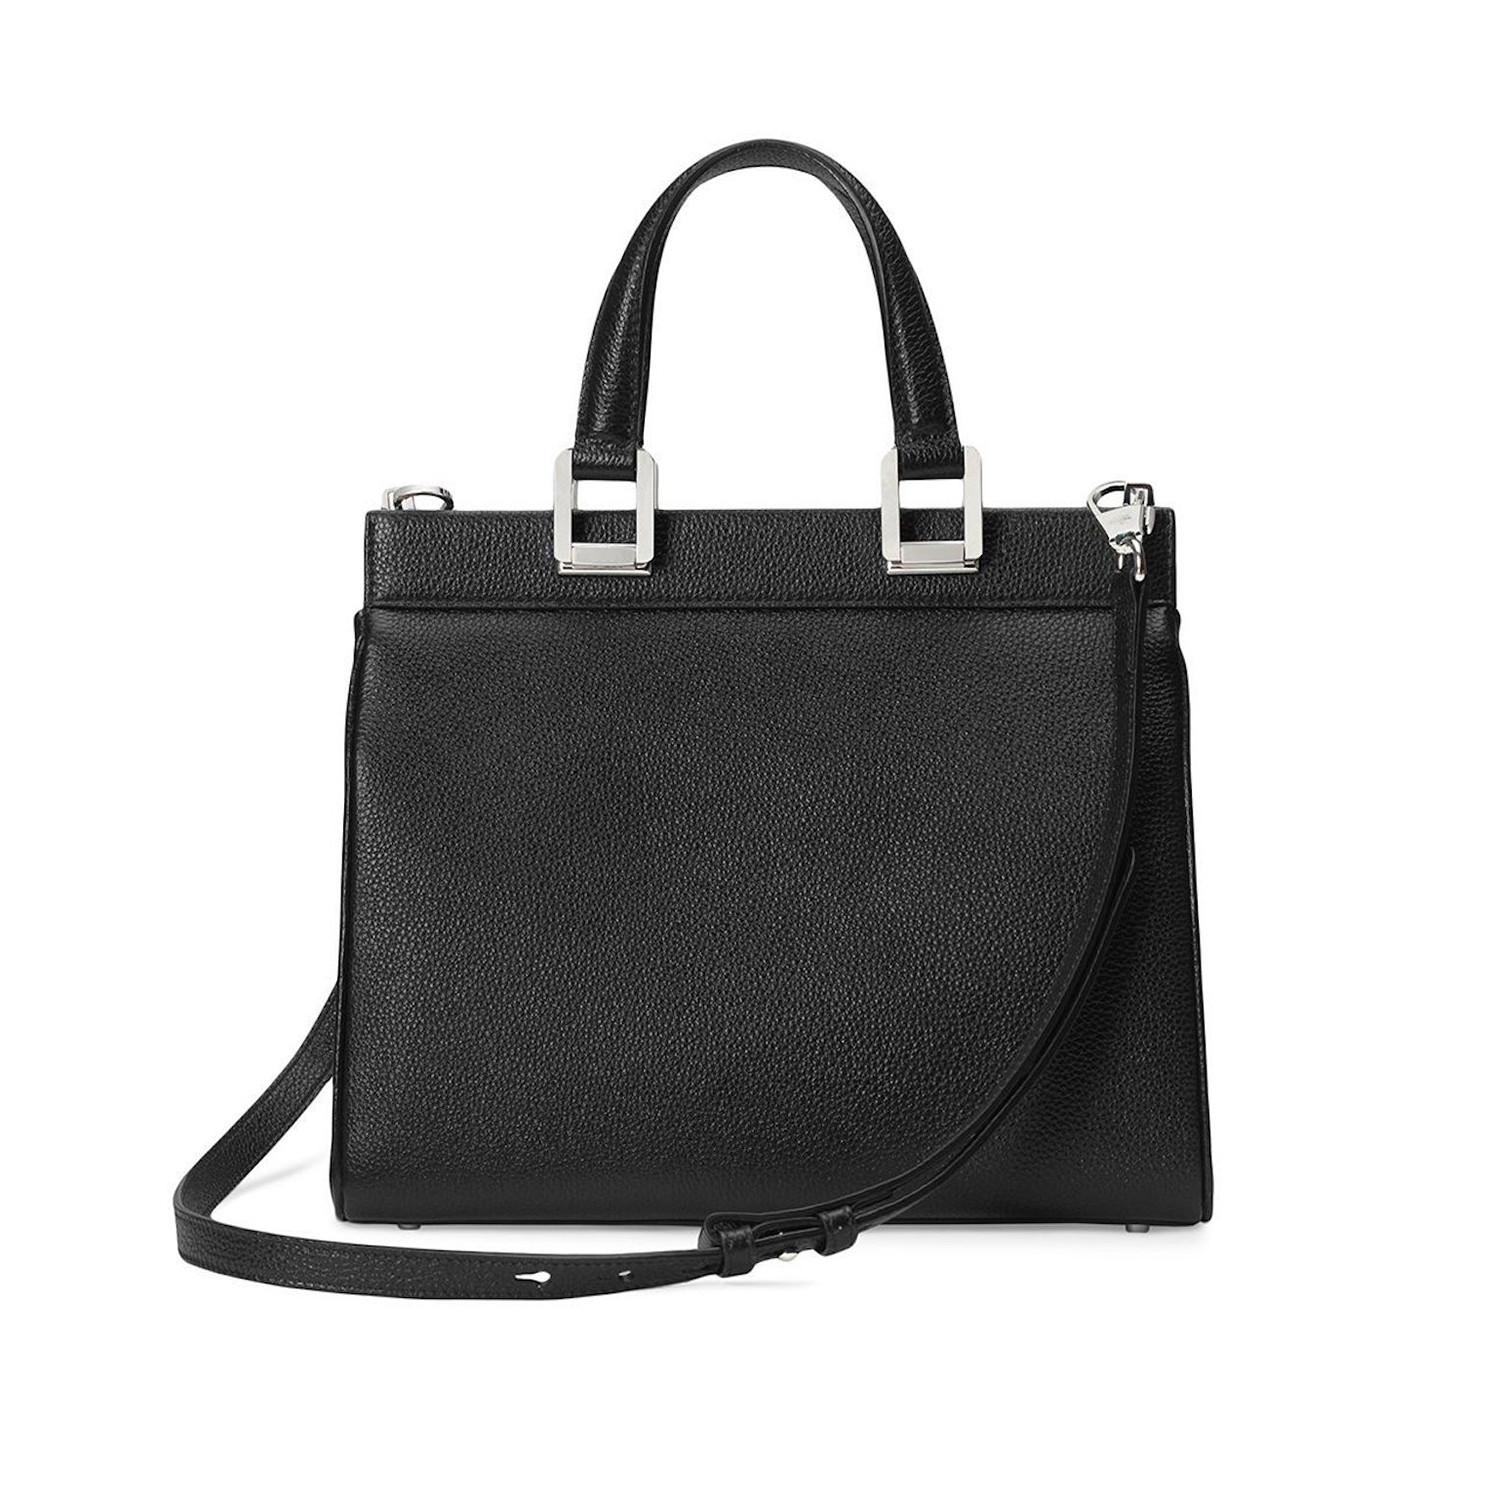 Gucci // Zumi Grainy Leather Small Top Handle Bag // Black - The ...